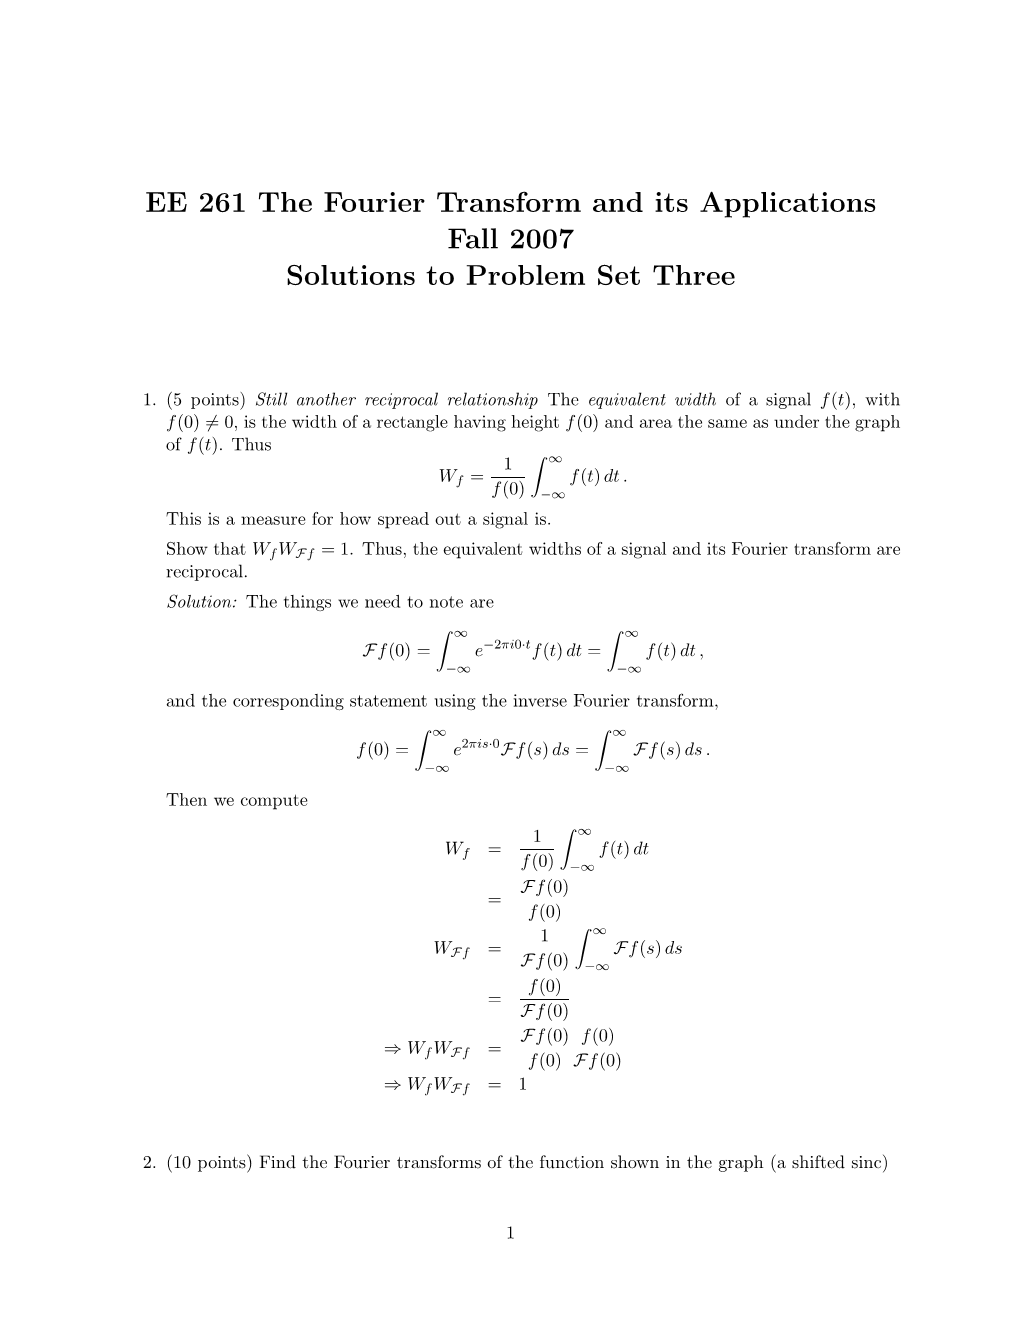 EE 261 the Fourier Transform and Its Applications Fall 2007 Solutions to Problem Set Three